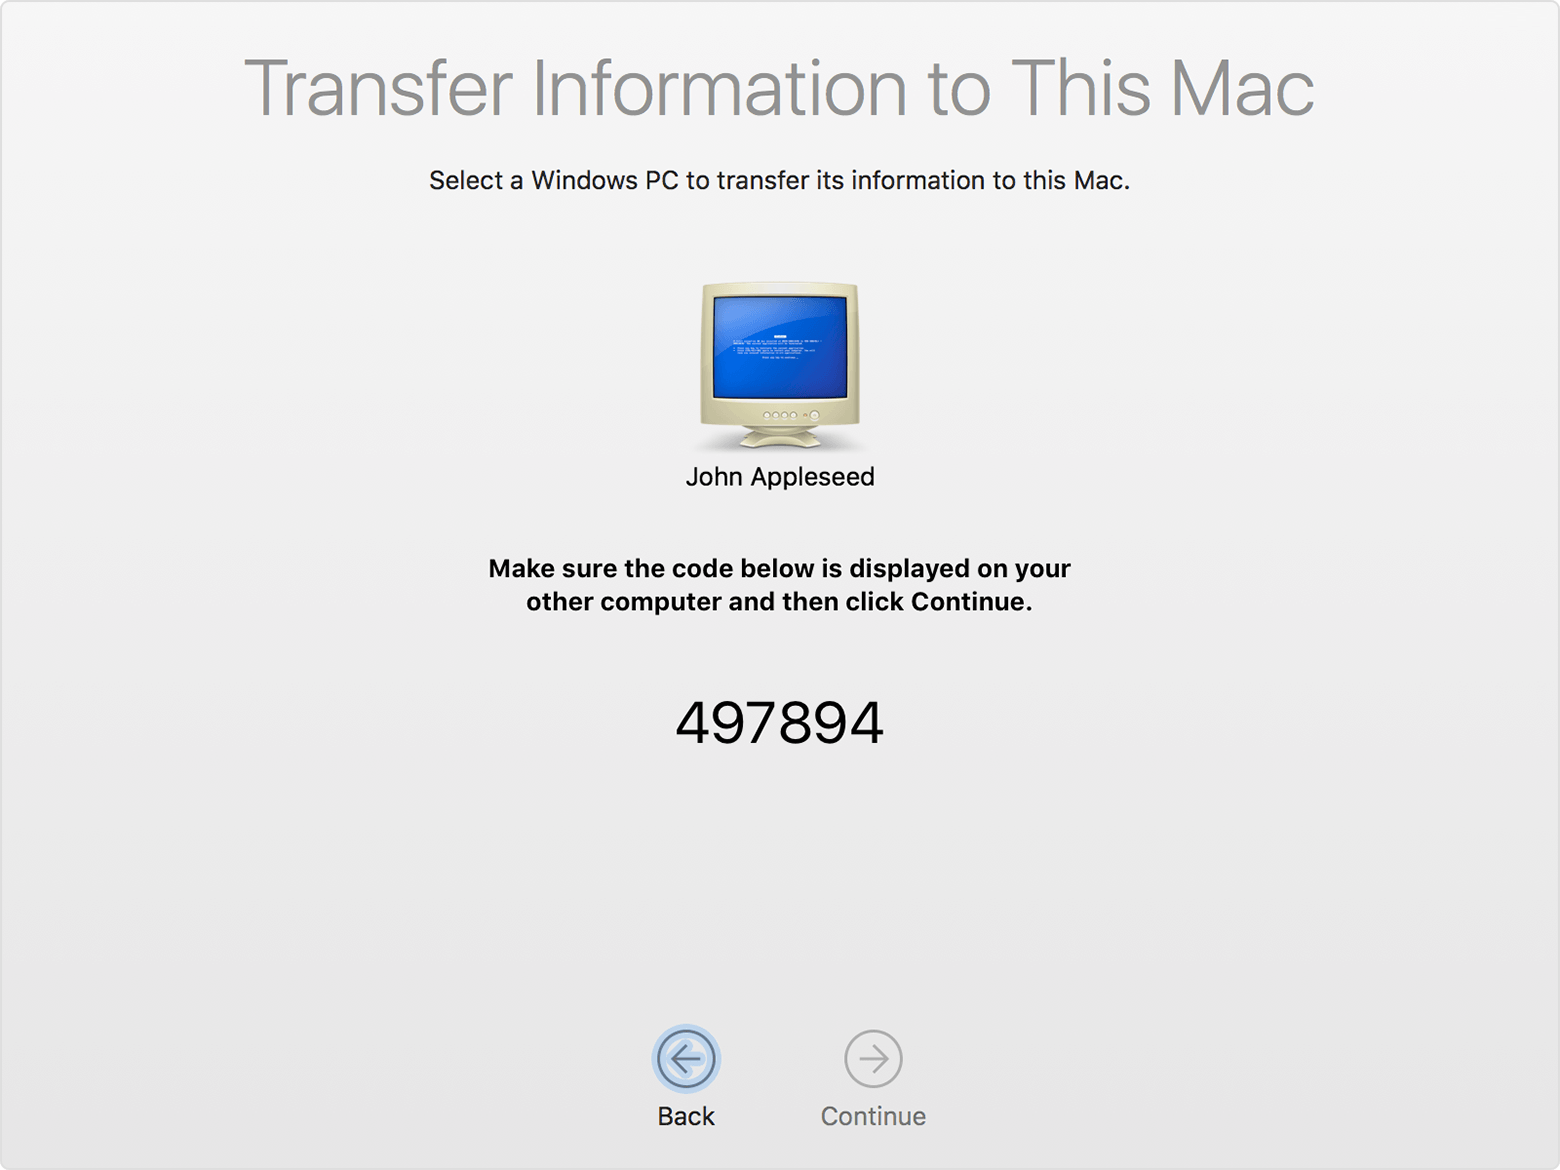 http //www.apple.com/migrate-to-mac download